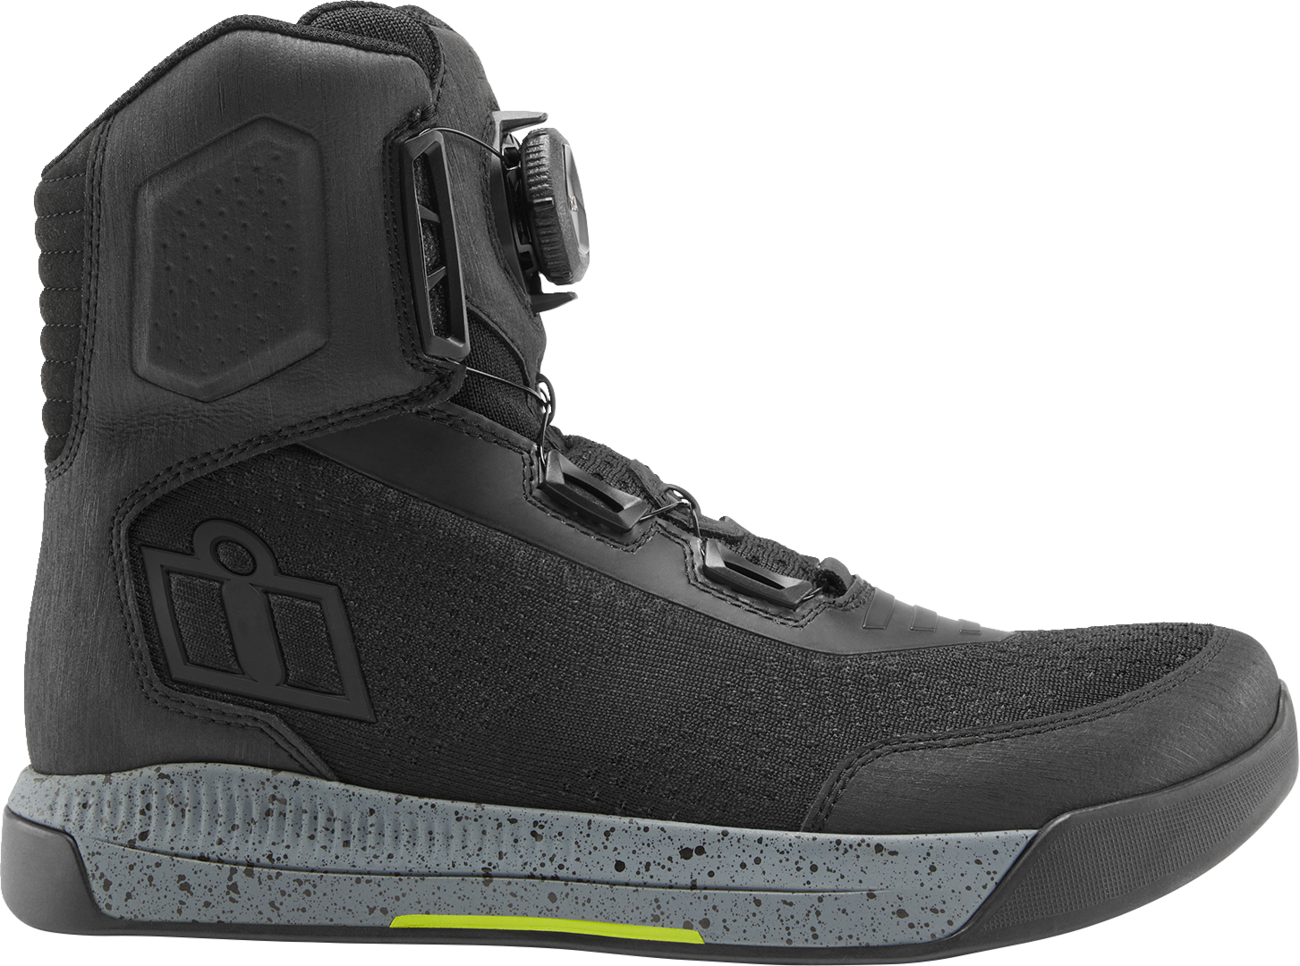 ICON Overlord™ Vented CE Boots - Black - Size 10 3403-1261